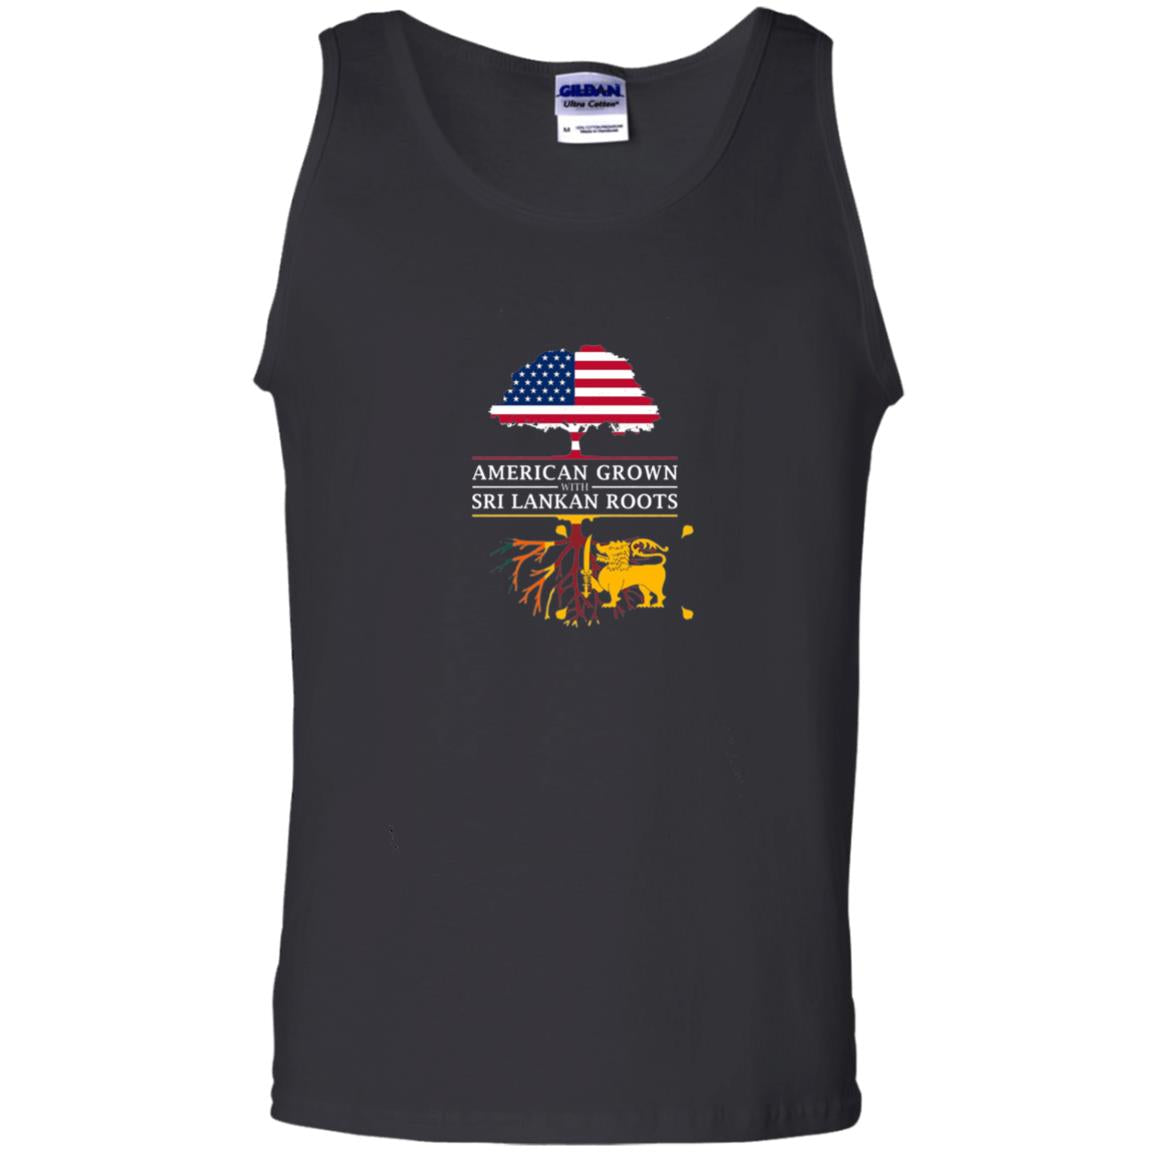 American Grown With Sri Lankan Roots Shirt